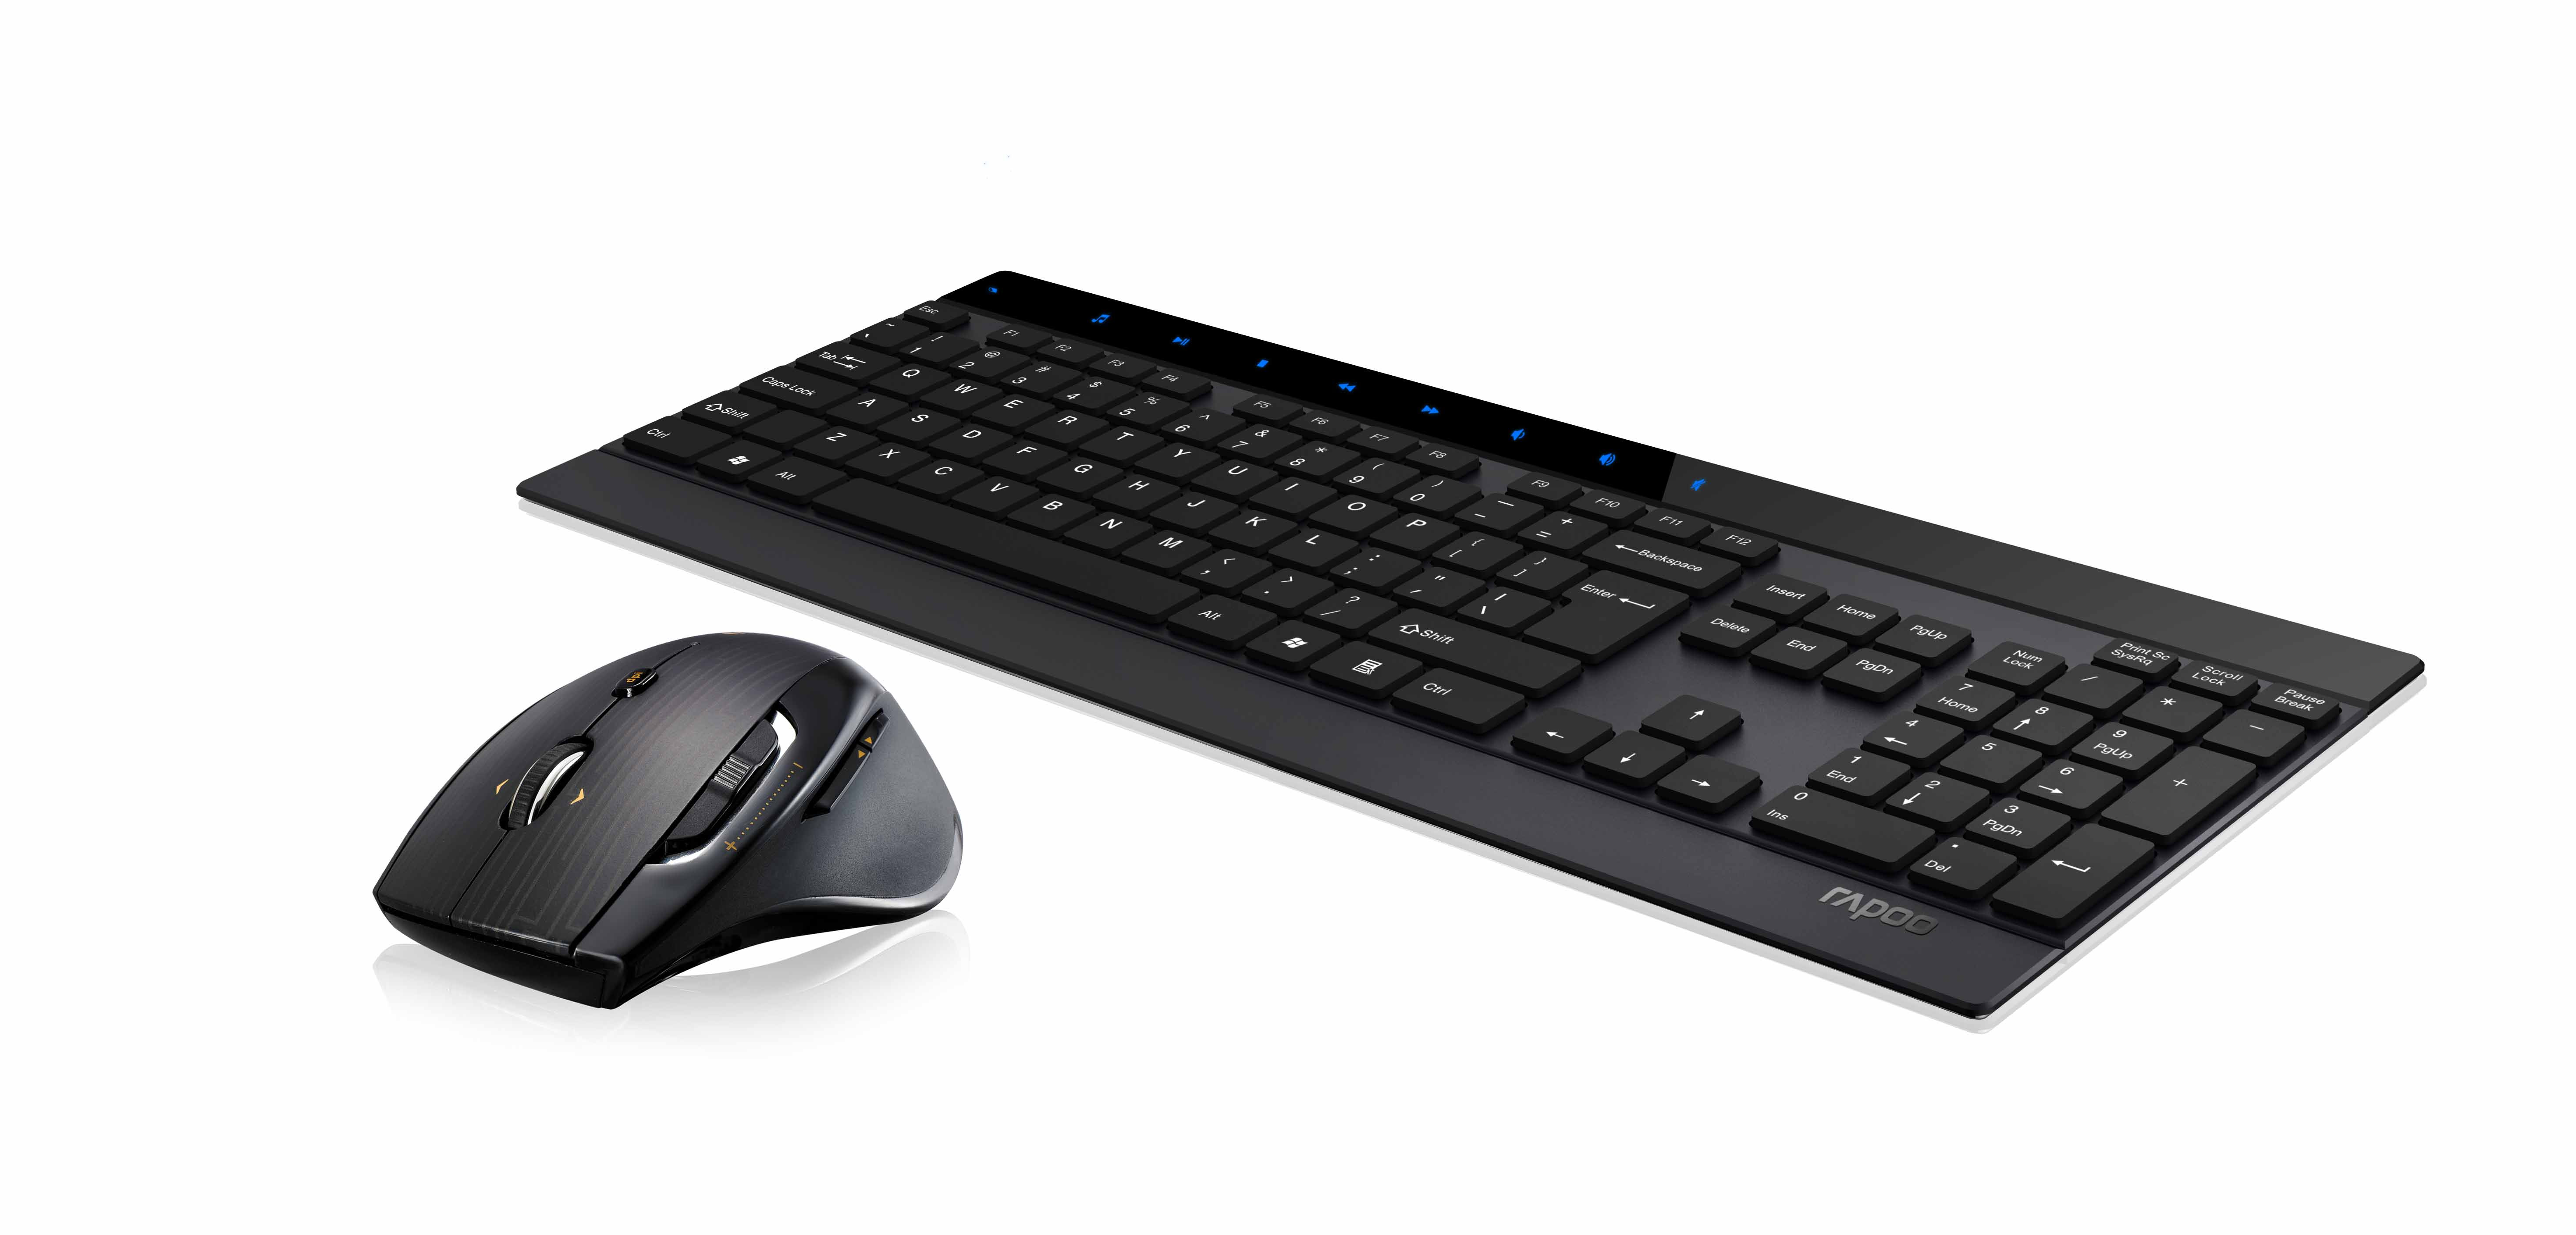 Rapoo Releases the 8900P, an Advanced Wireless Mouse and Keyboard Set for Your Desktop